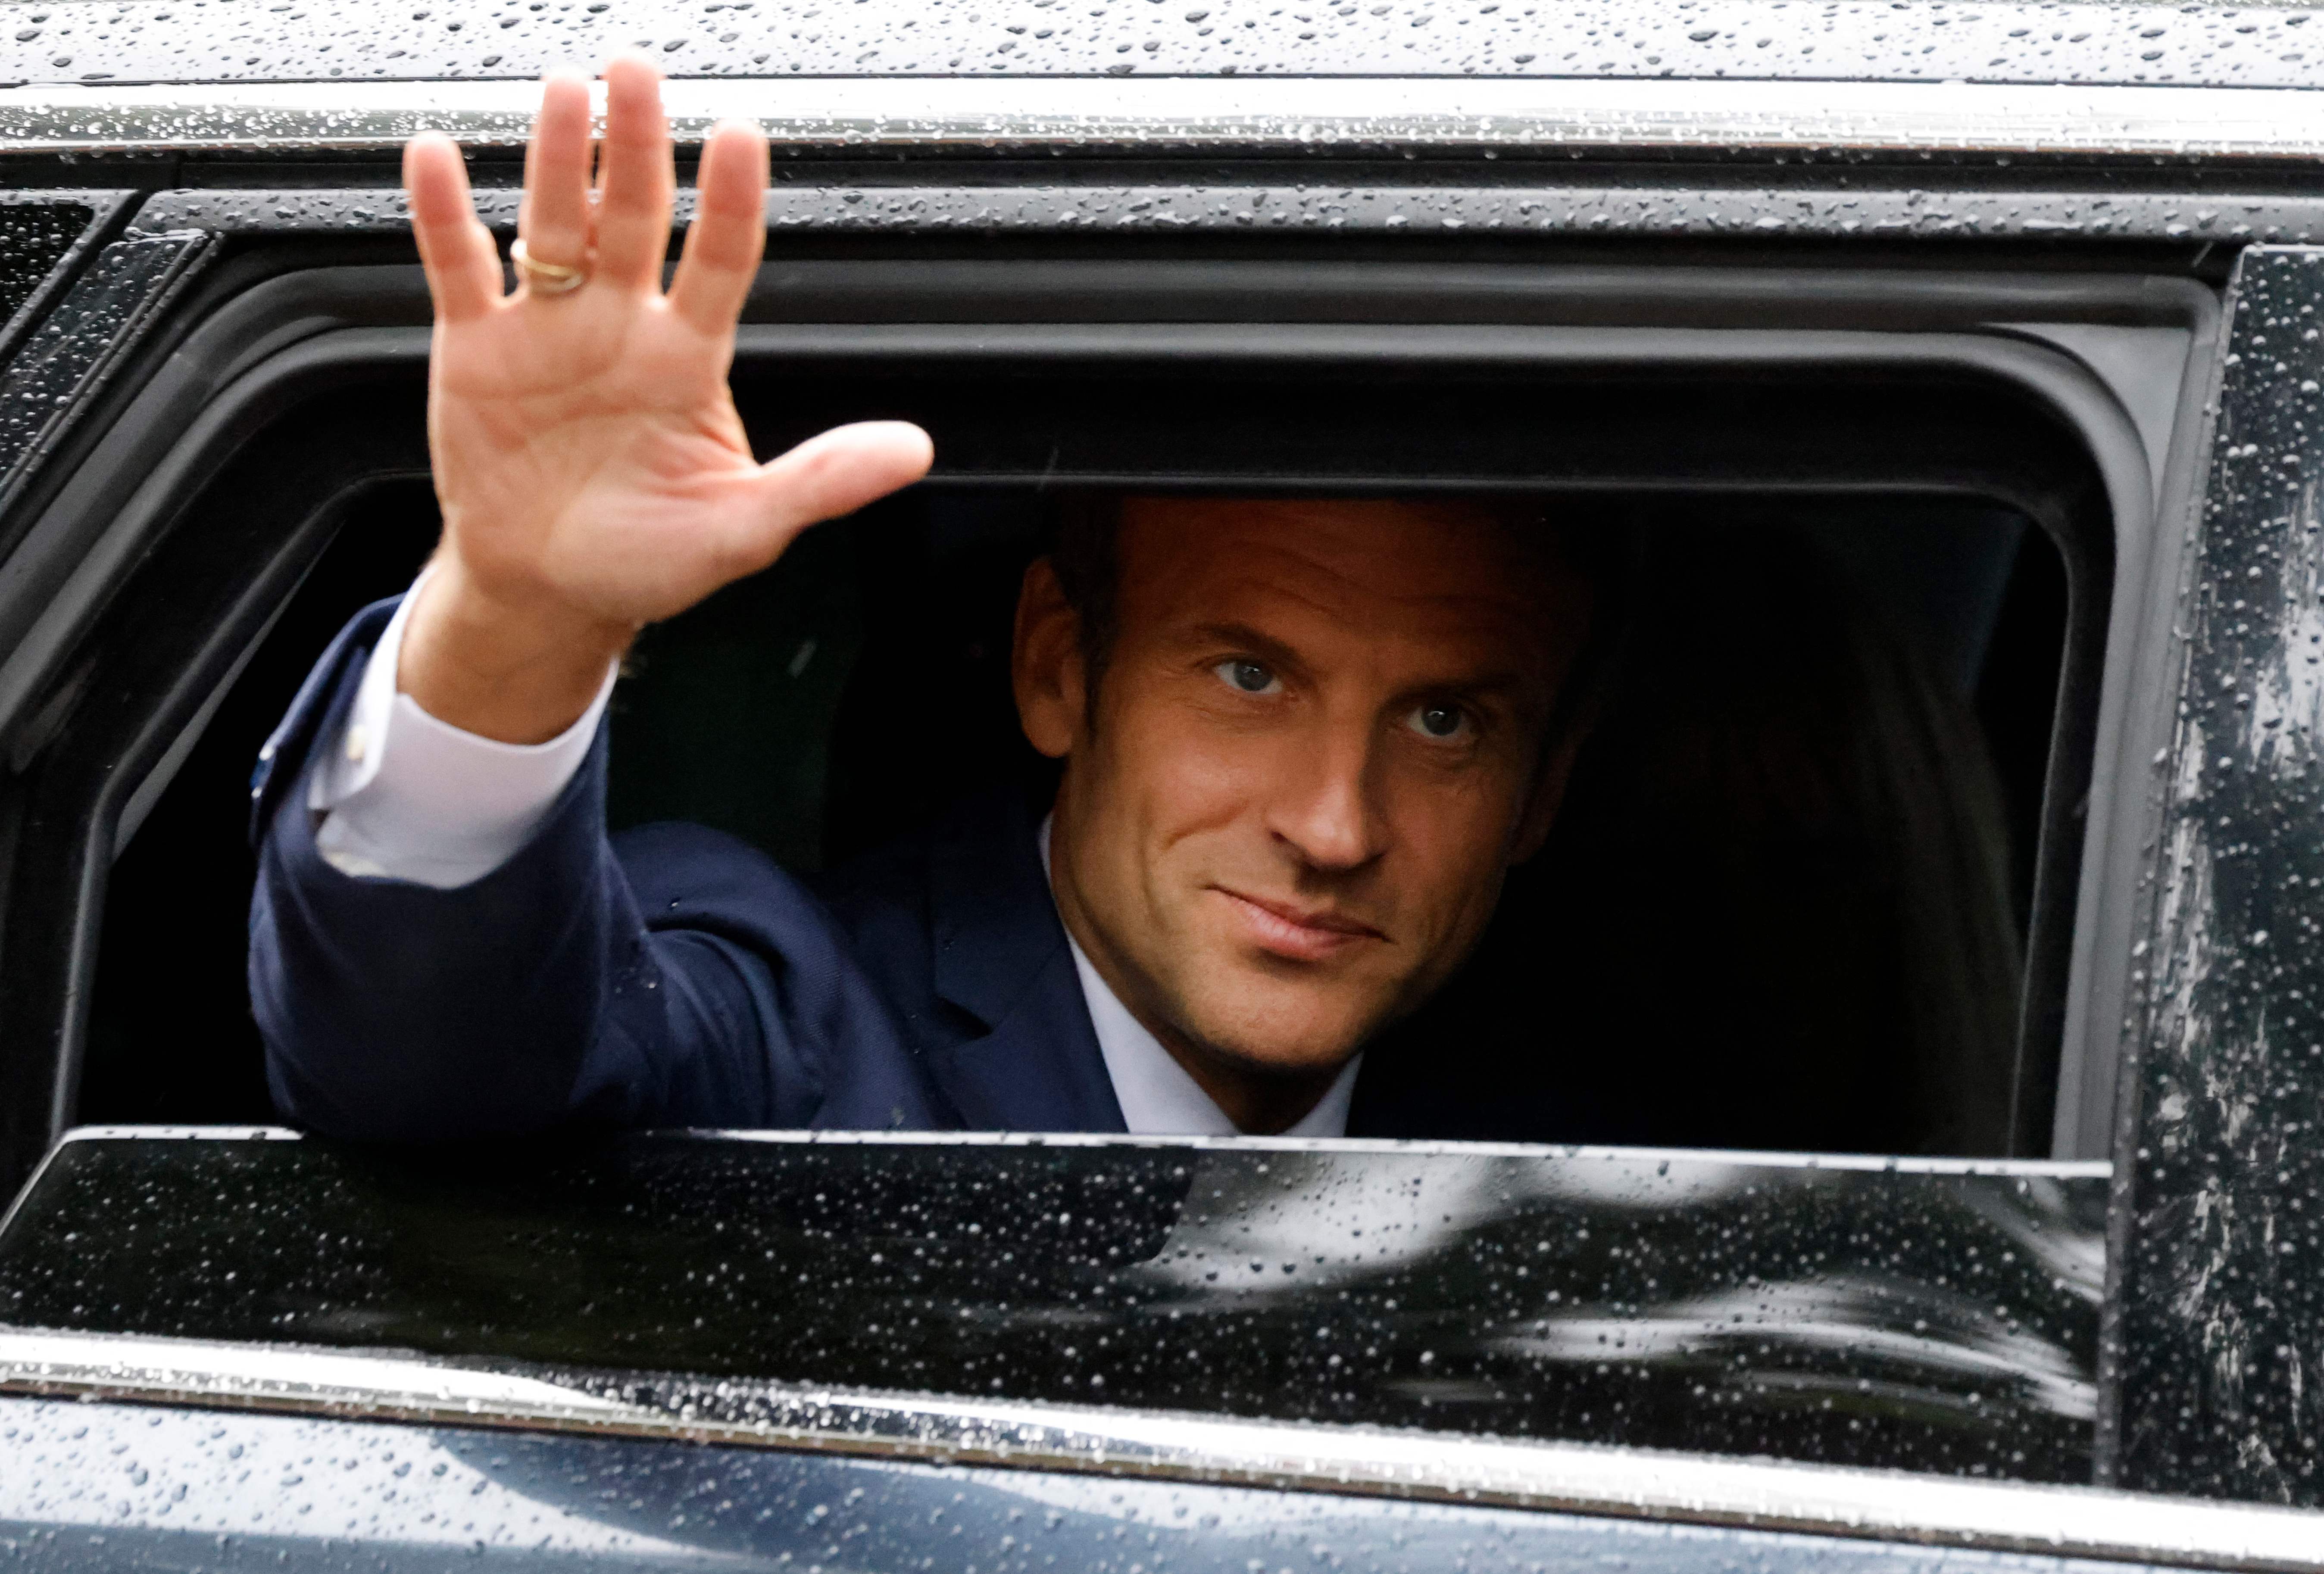 Macron waves to supporters after voting in Le Touquet, northern France